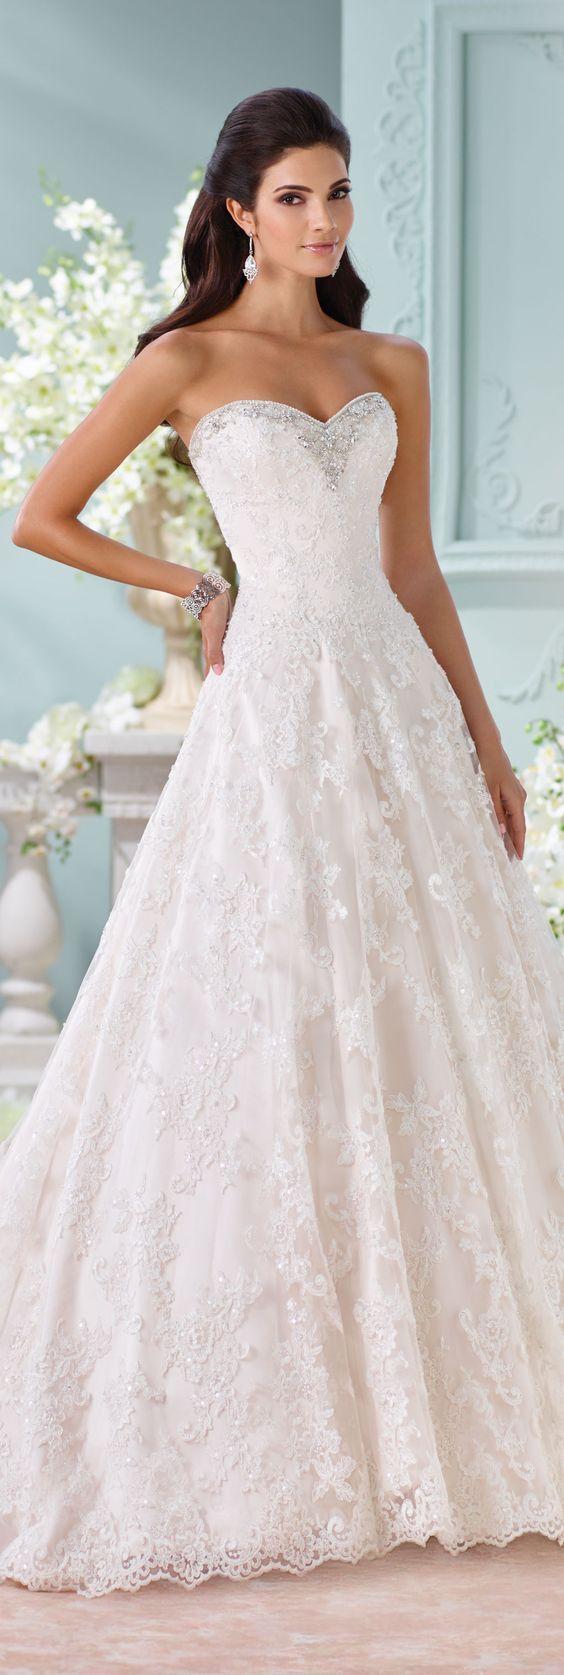 Wedding - 100 Sweetheart Wedding Dresses That Will Drive You Crazy